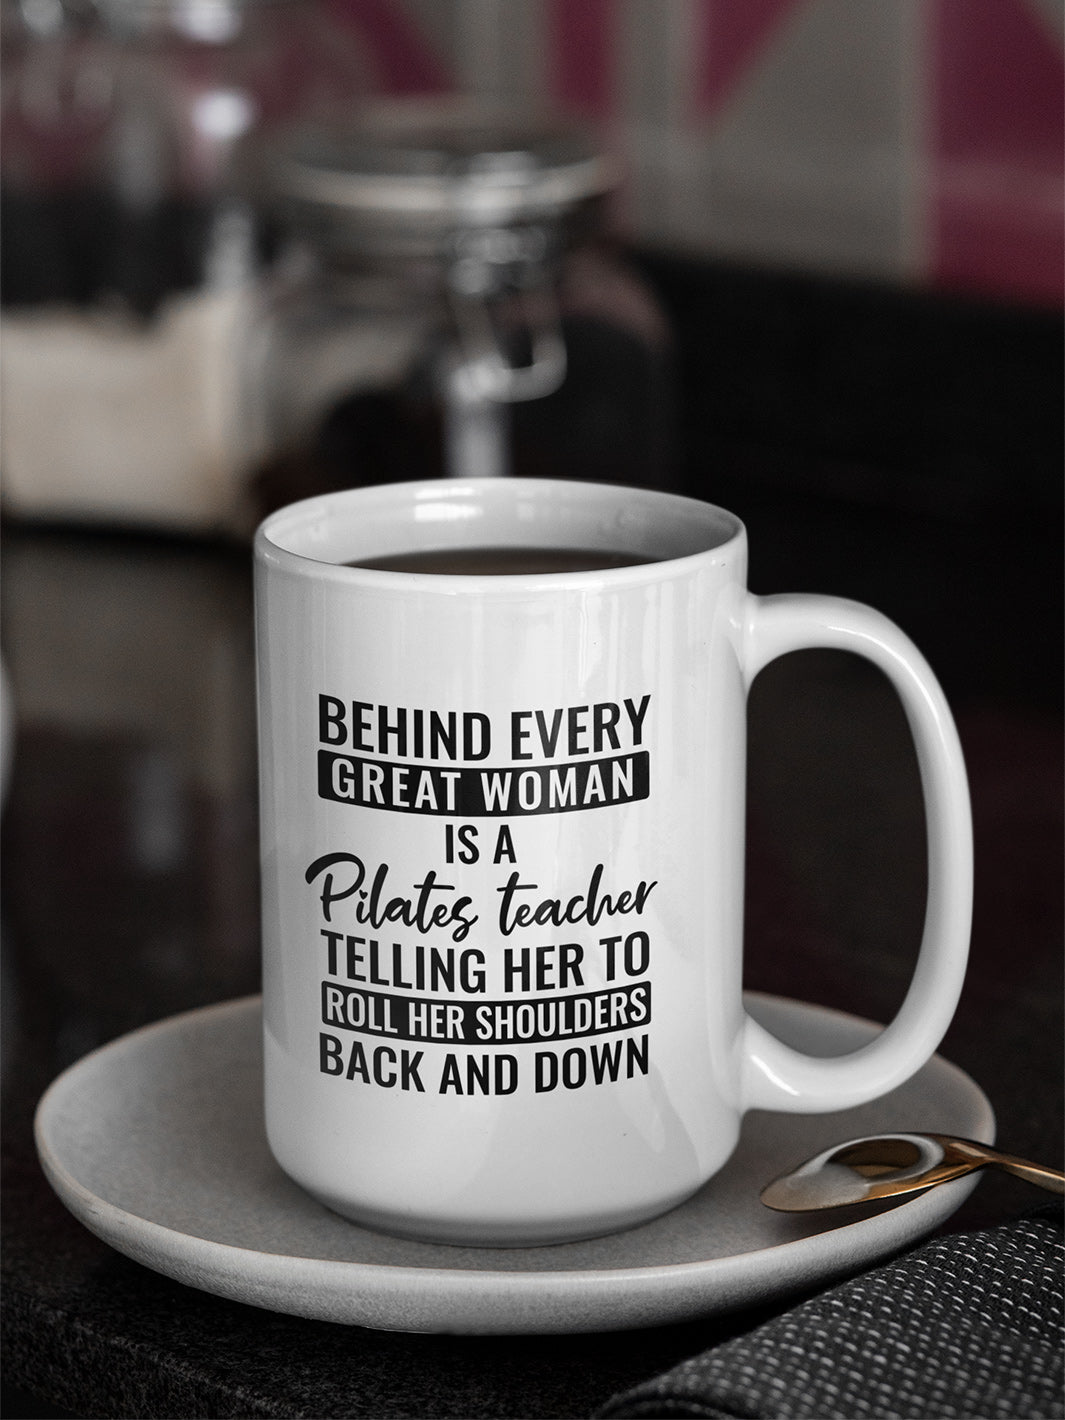 15 oz coffee mug that says "Behind Every Great Woman is A Pilates Teacher telling her to roll her shoulders back and down"